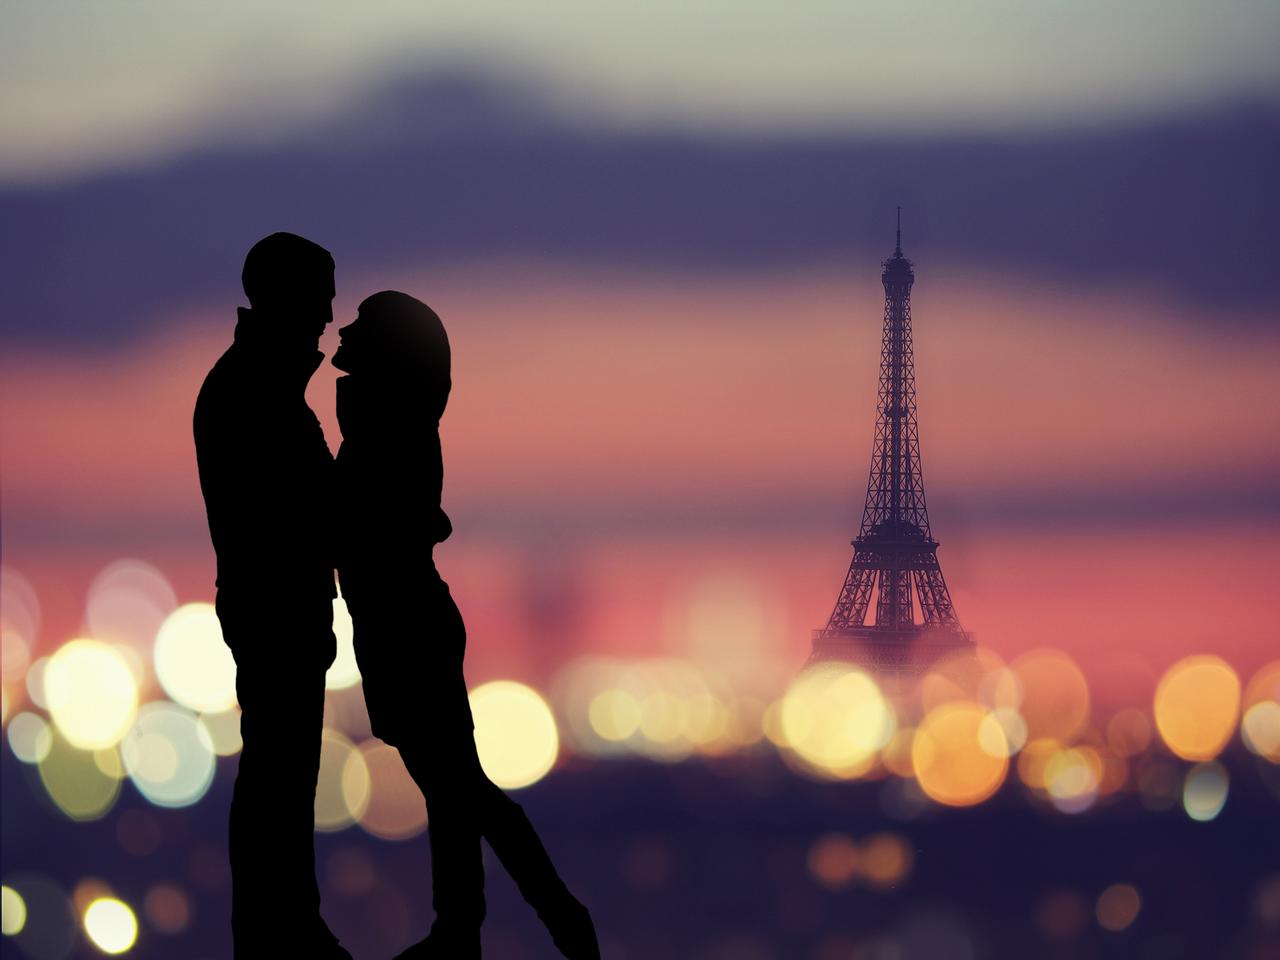 silhouette of romantic lovers with eiffel tower on a background in Paris , Franceabstract background : silhouette of romantic lovers with eiffel tower in Paris with sunset